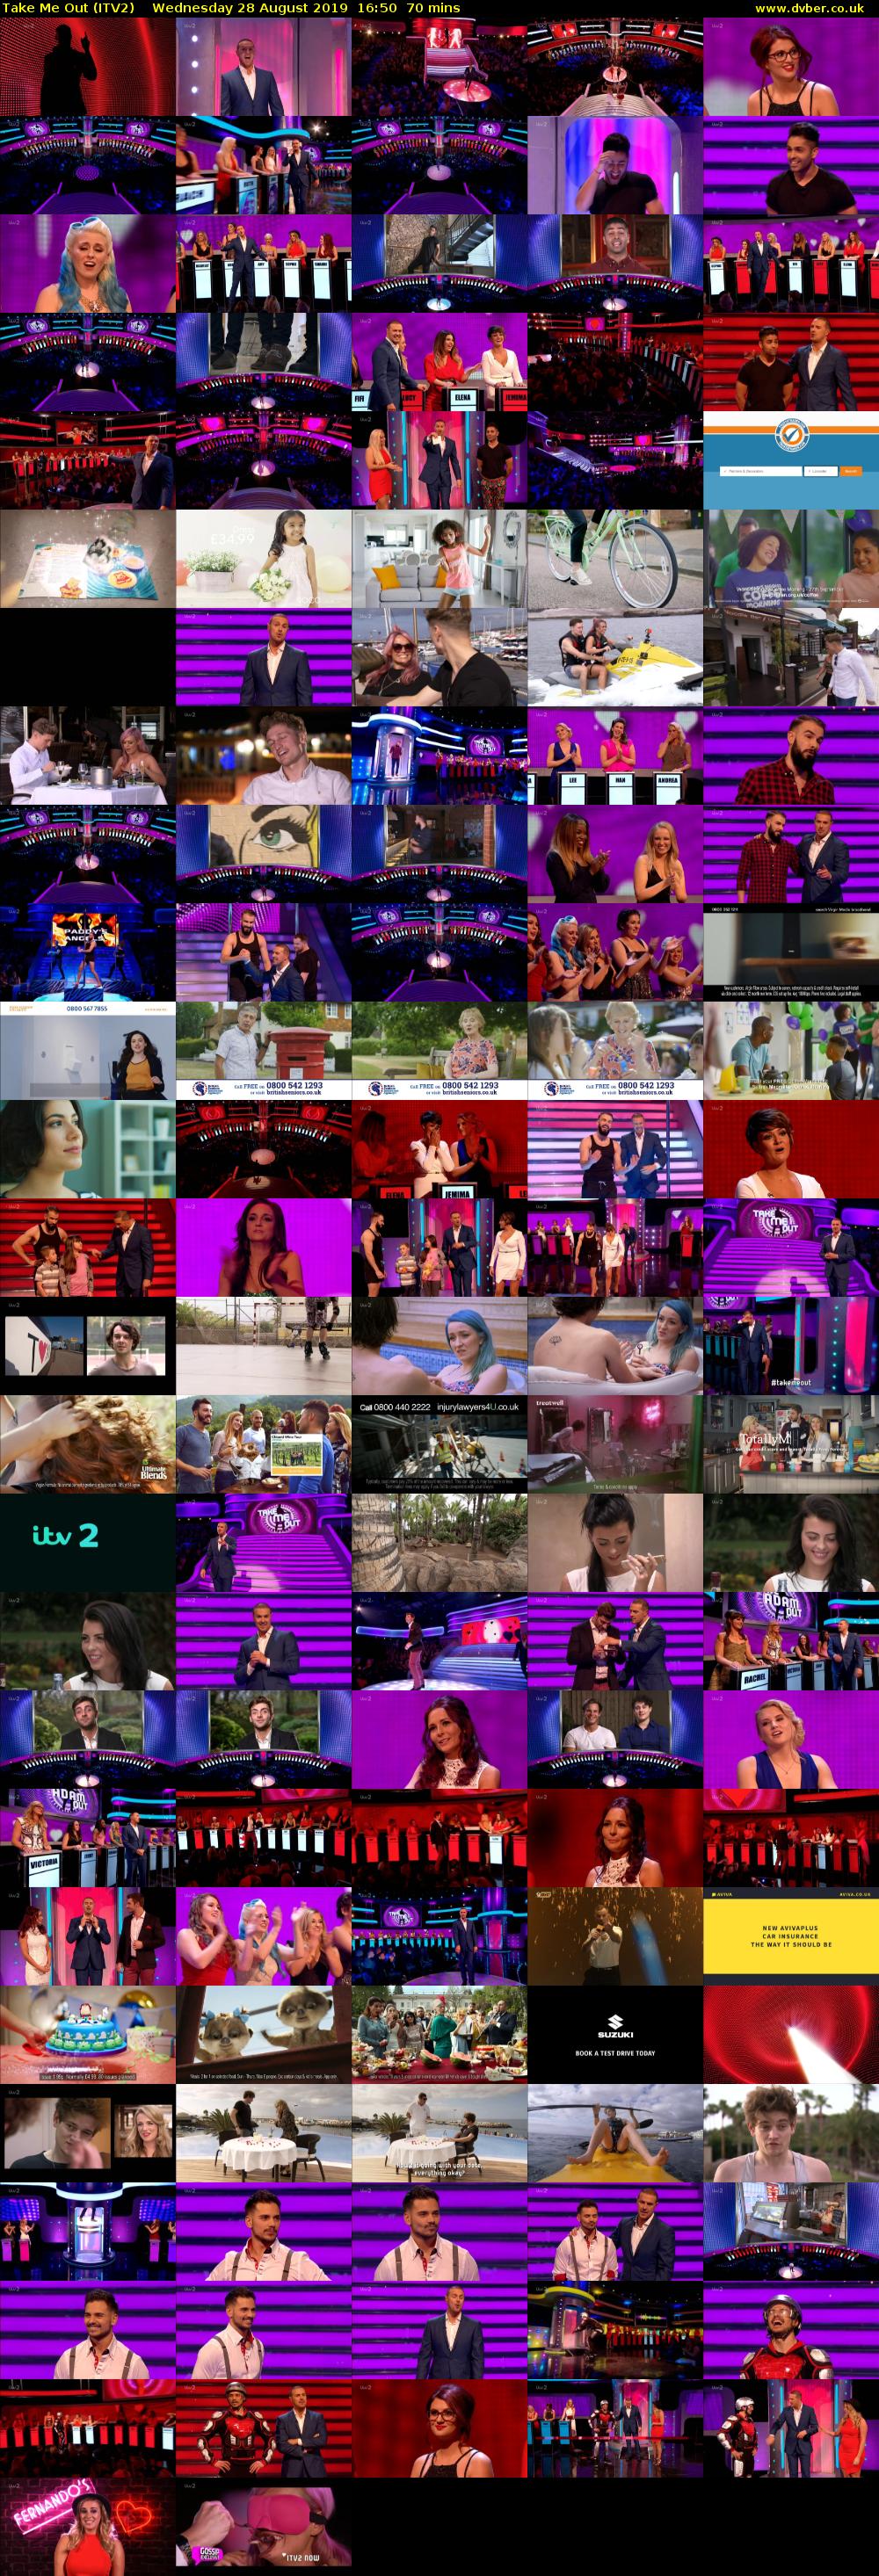 Take Me Out (ITV2) Wednesday 28 August 2019 16:50 - 18:00